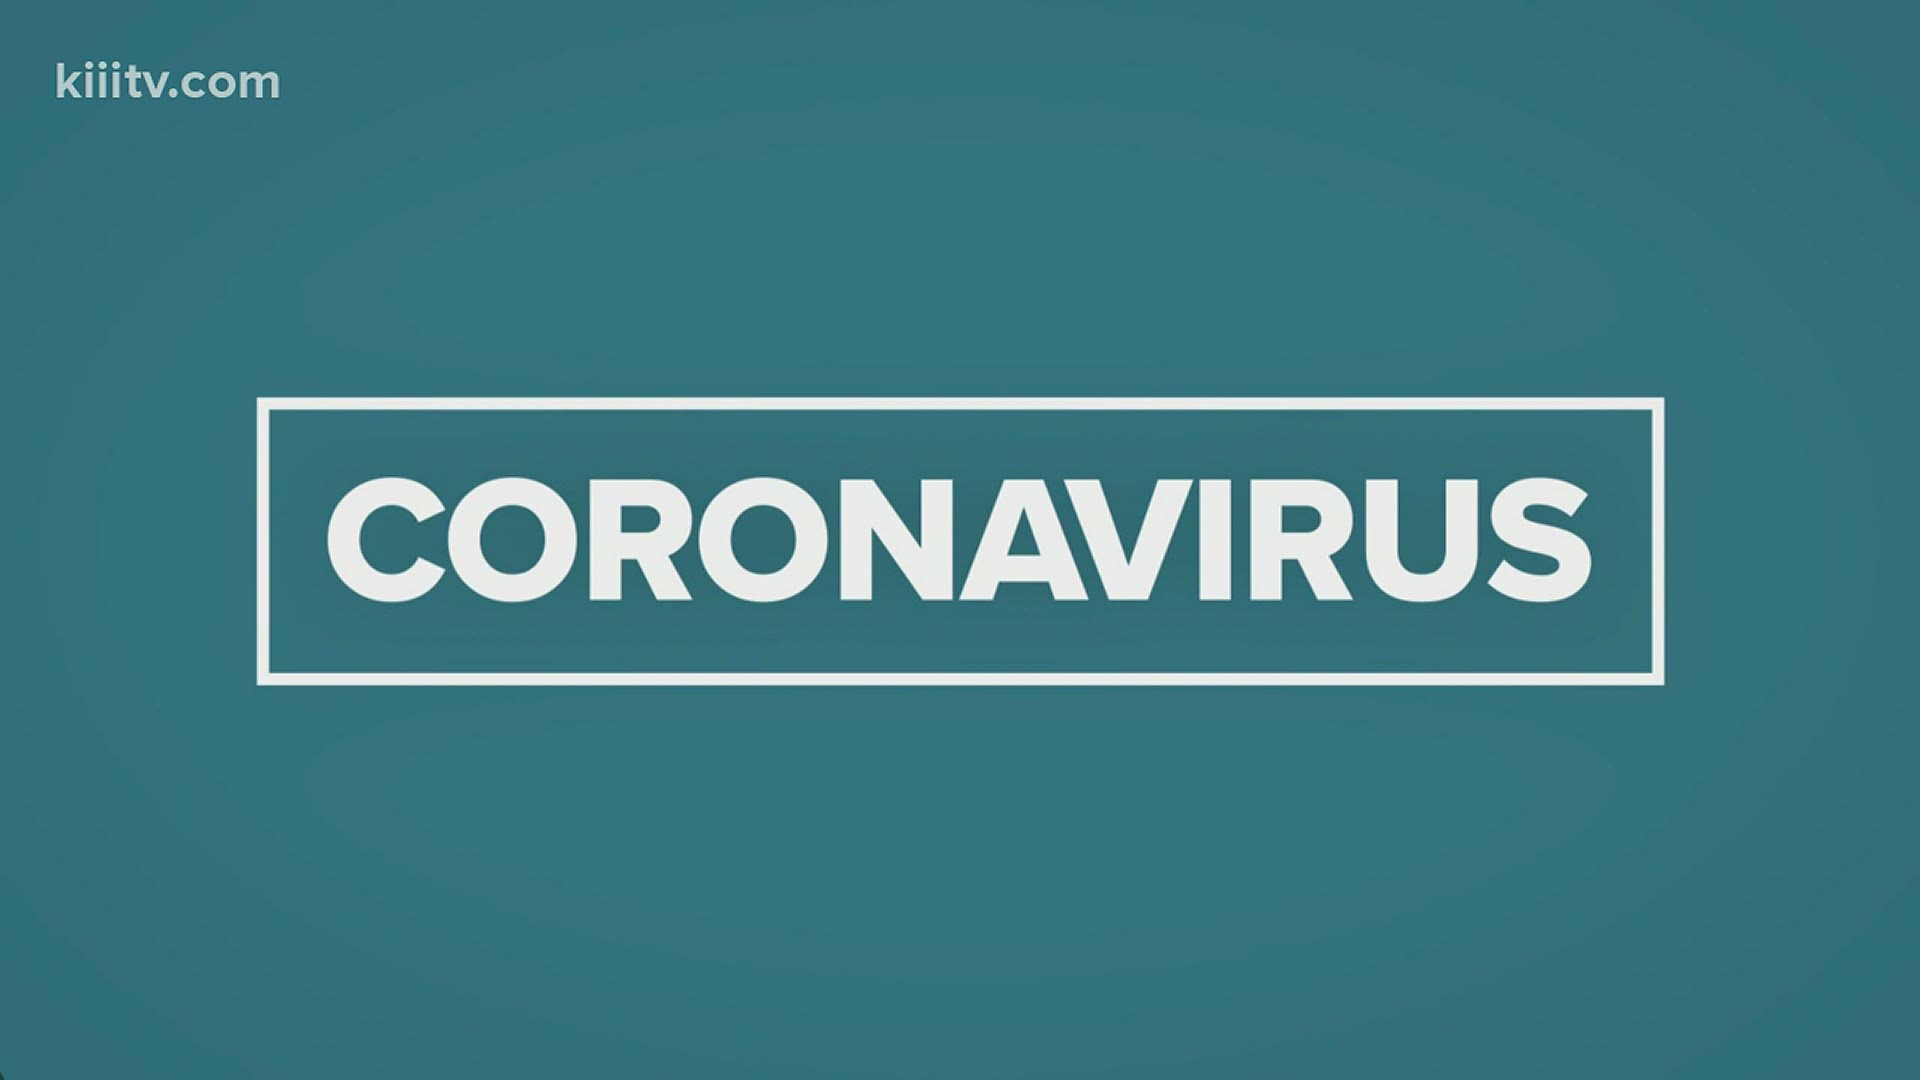 Breakthrough cases are classified as people who have had the vaccine and still ended up getting the coronavirus.